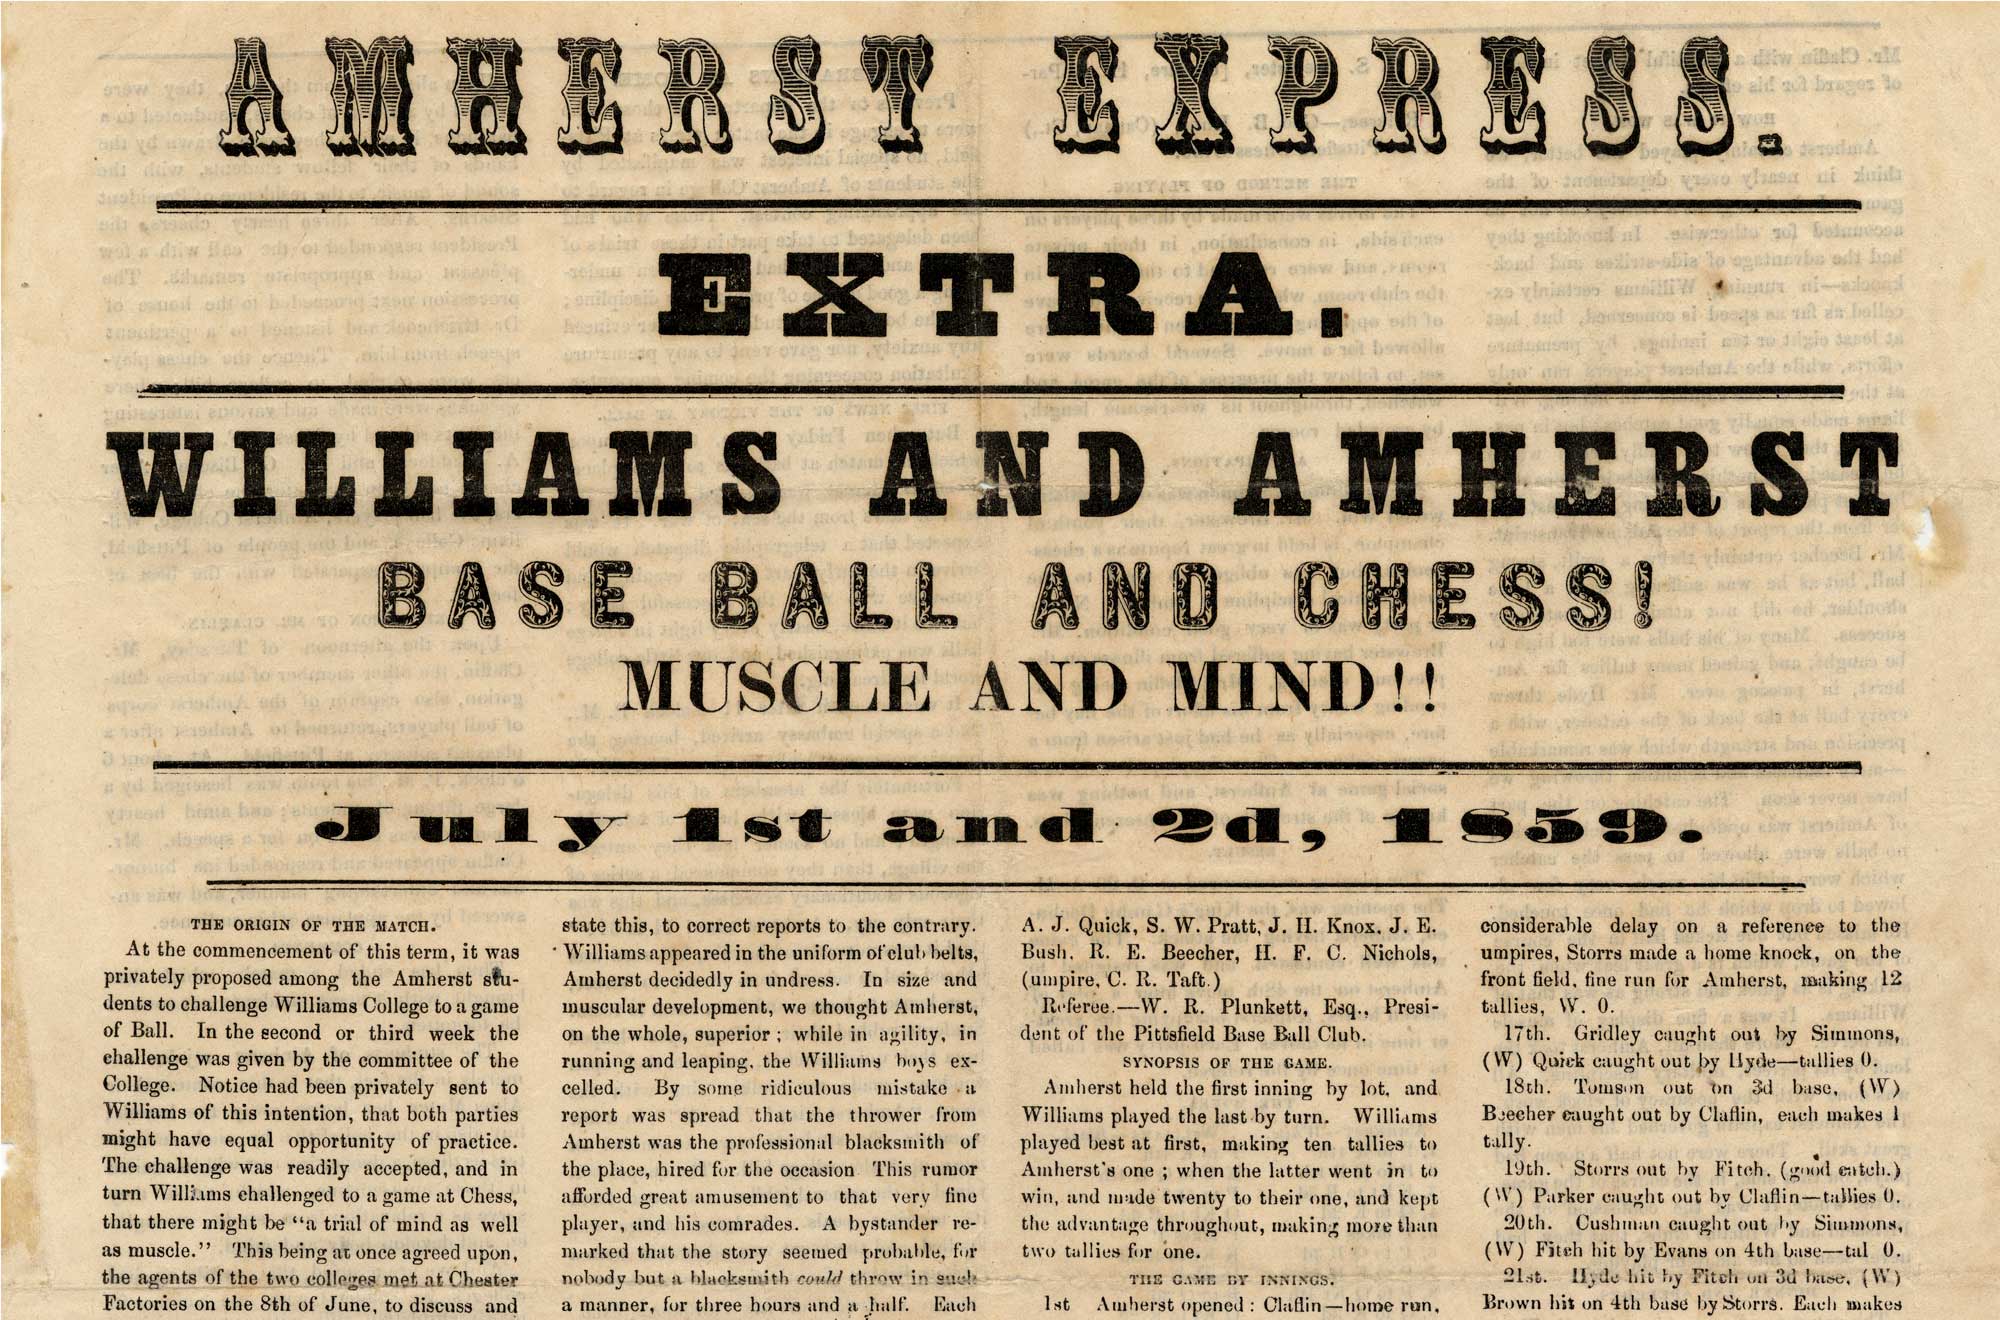 newspaper from 1859 about Williams and Amherst competing in baseball and chess